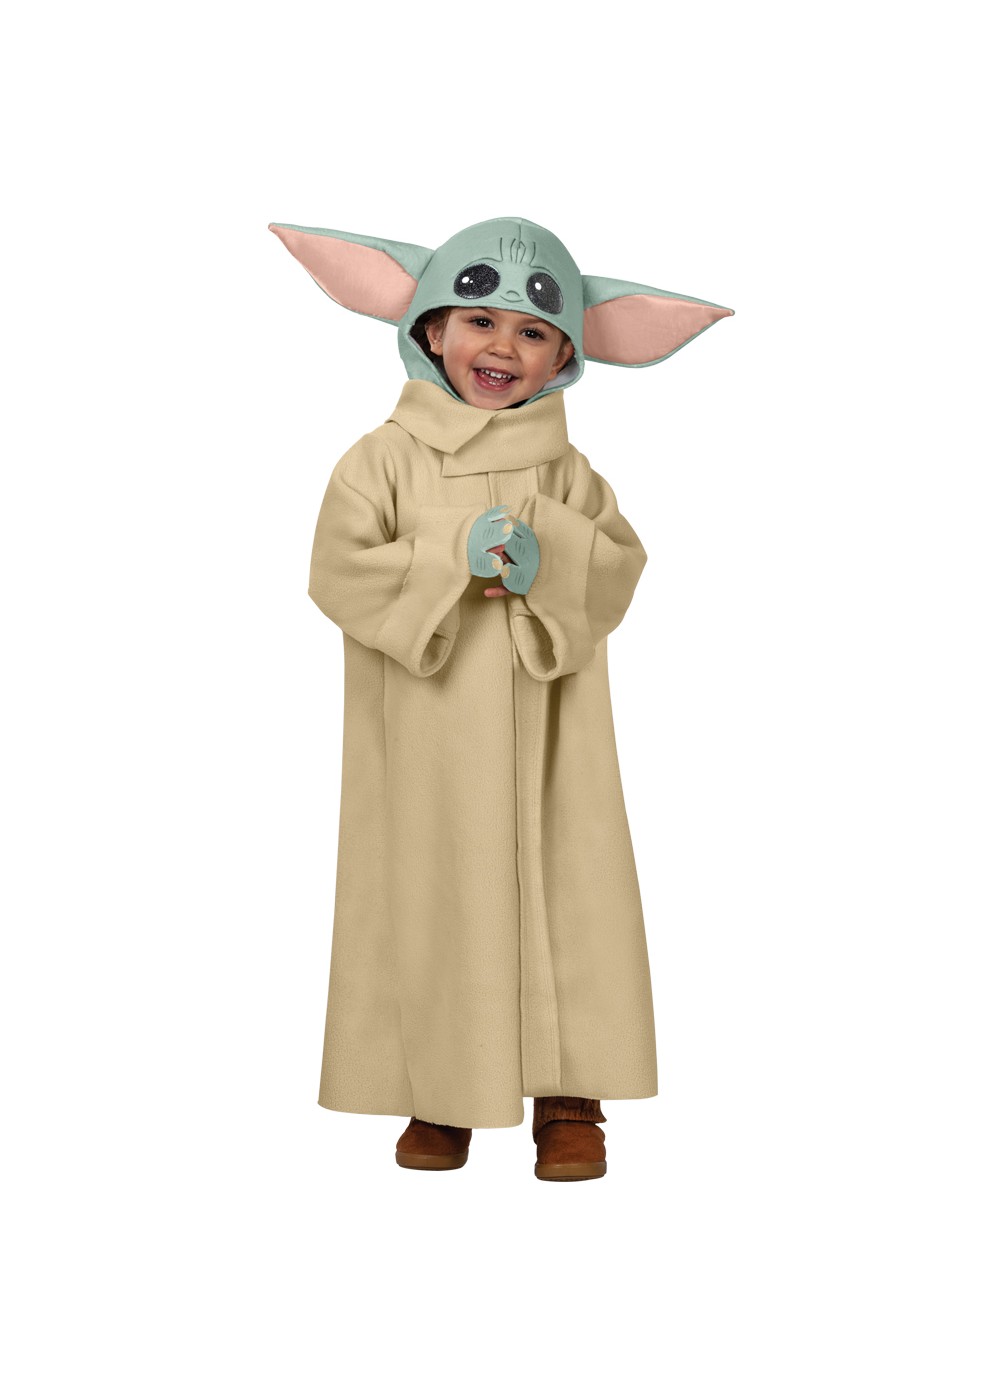 Star Wars The Mandalorian Baby Yoda Cosplay Costume For Kids Children Outfit 